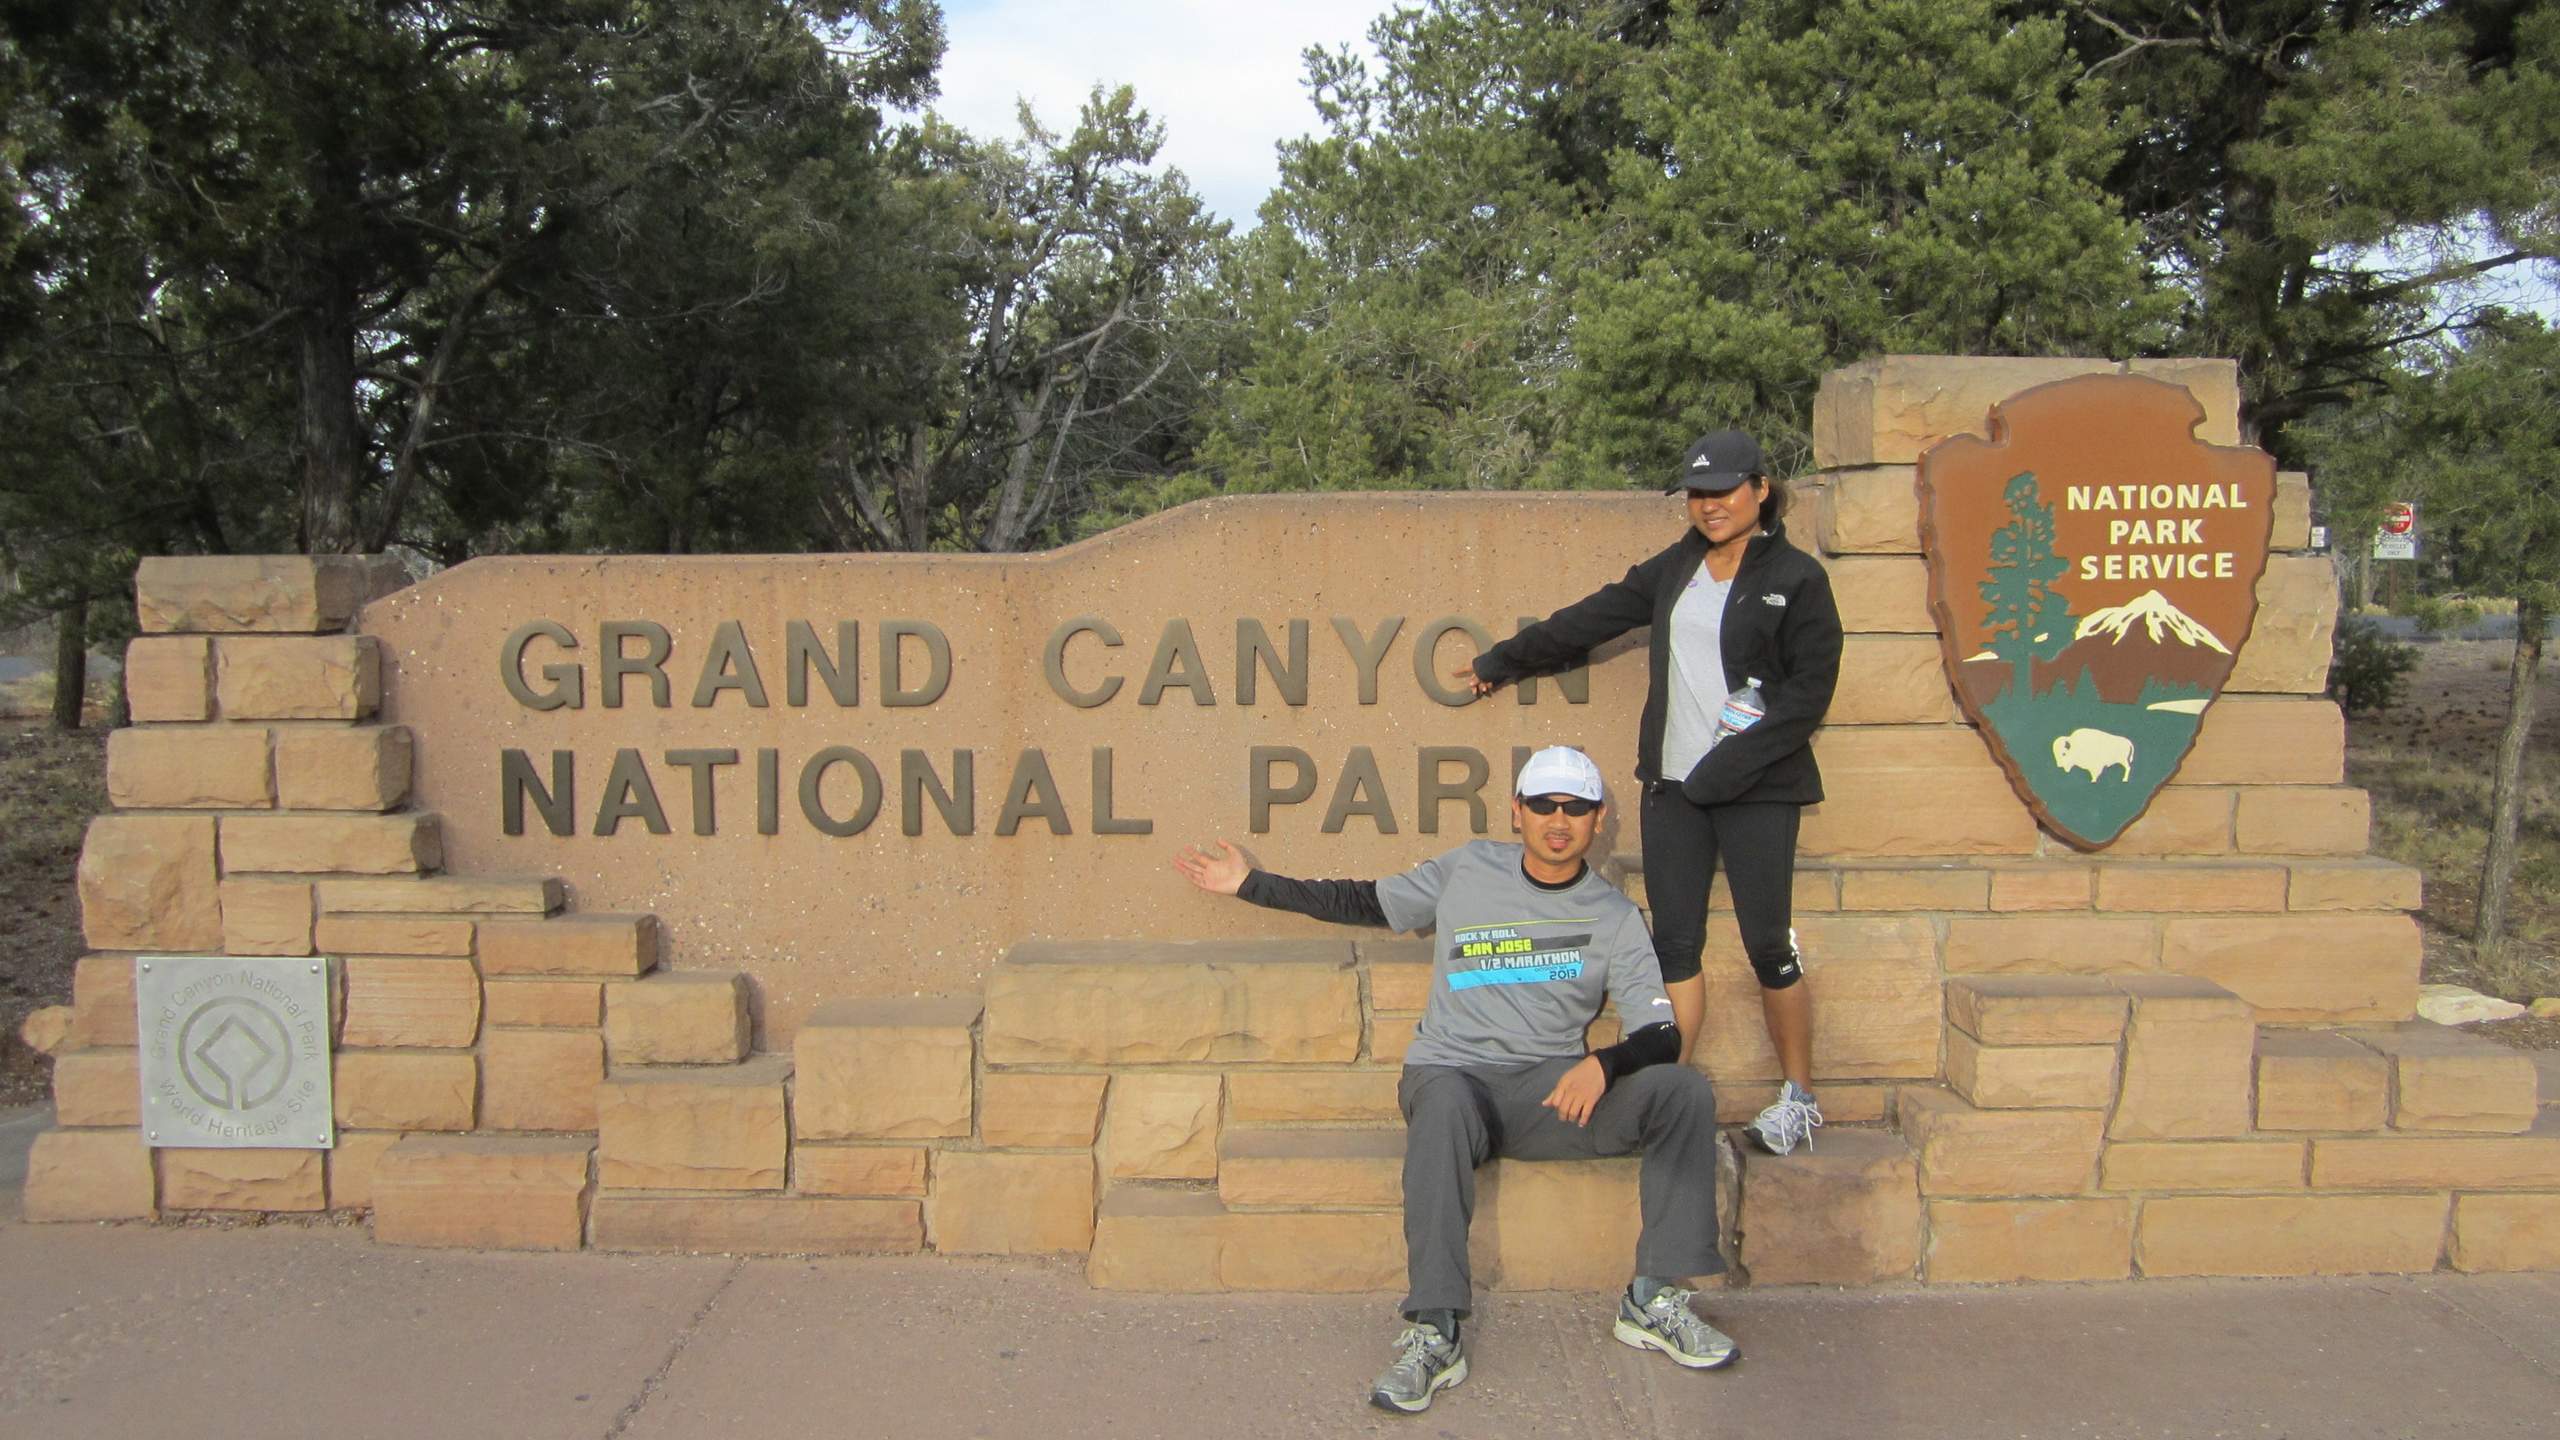 Bandy and Sara in front of the Grand Canyon National Park sign.